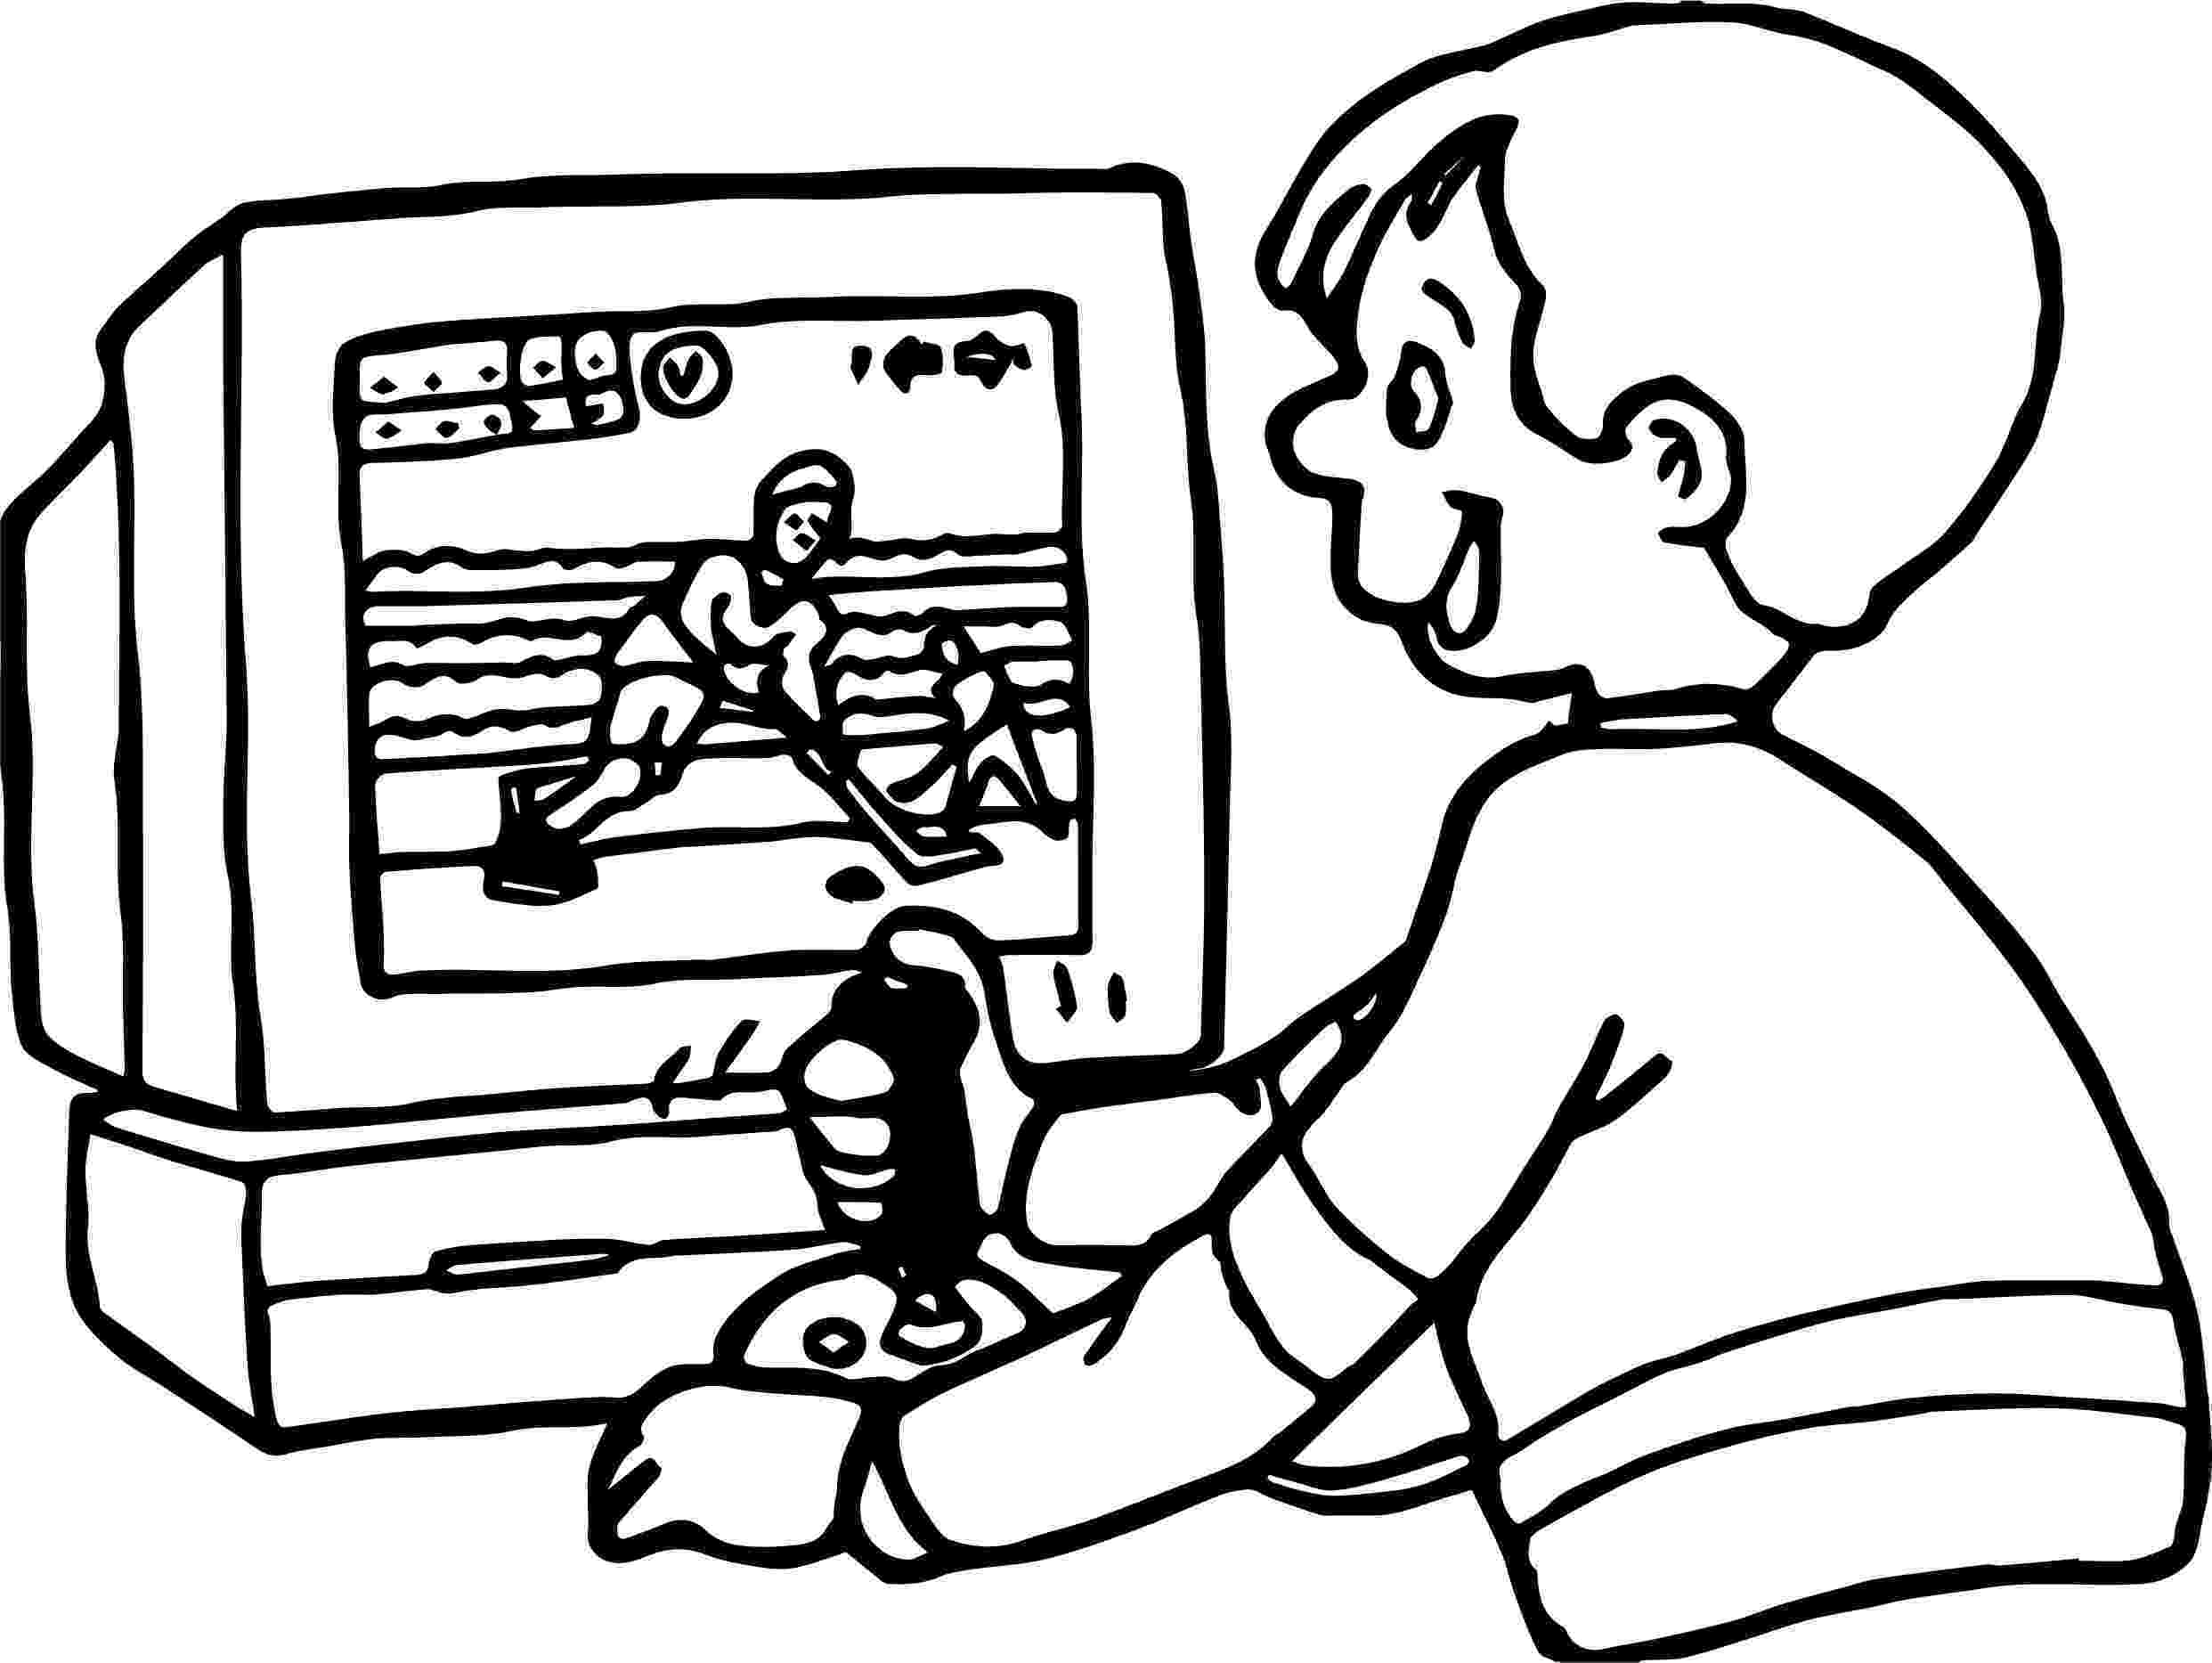 coloring picture games boy playing computer games hockey coloring page picture games coloring 